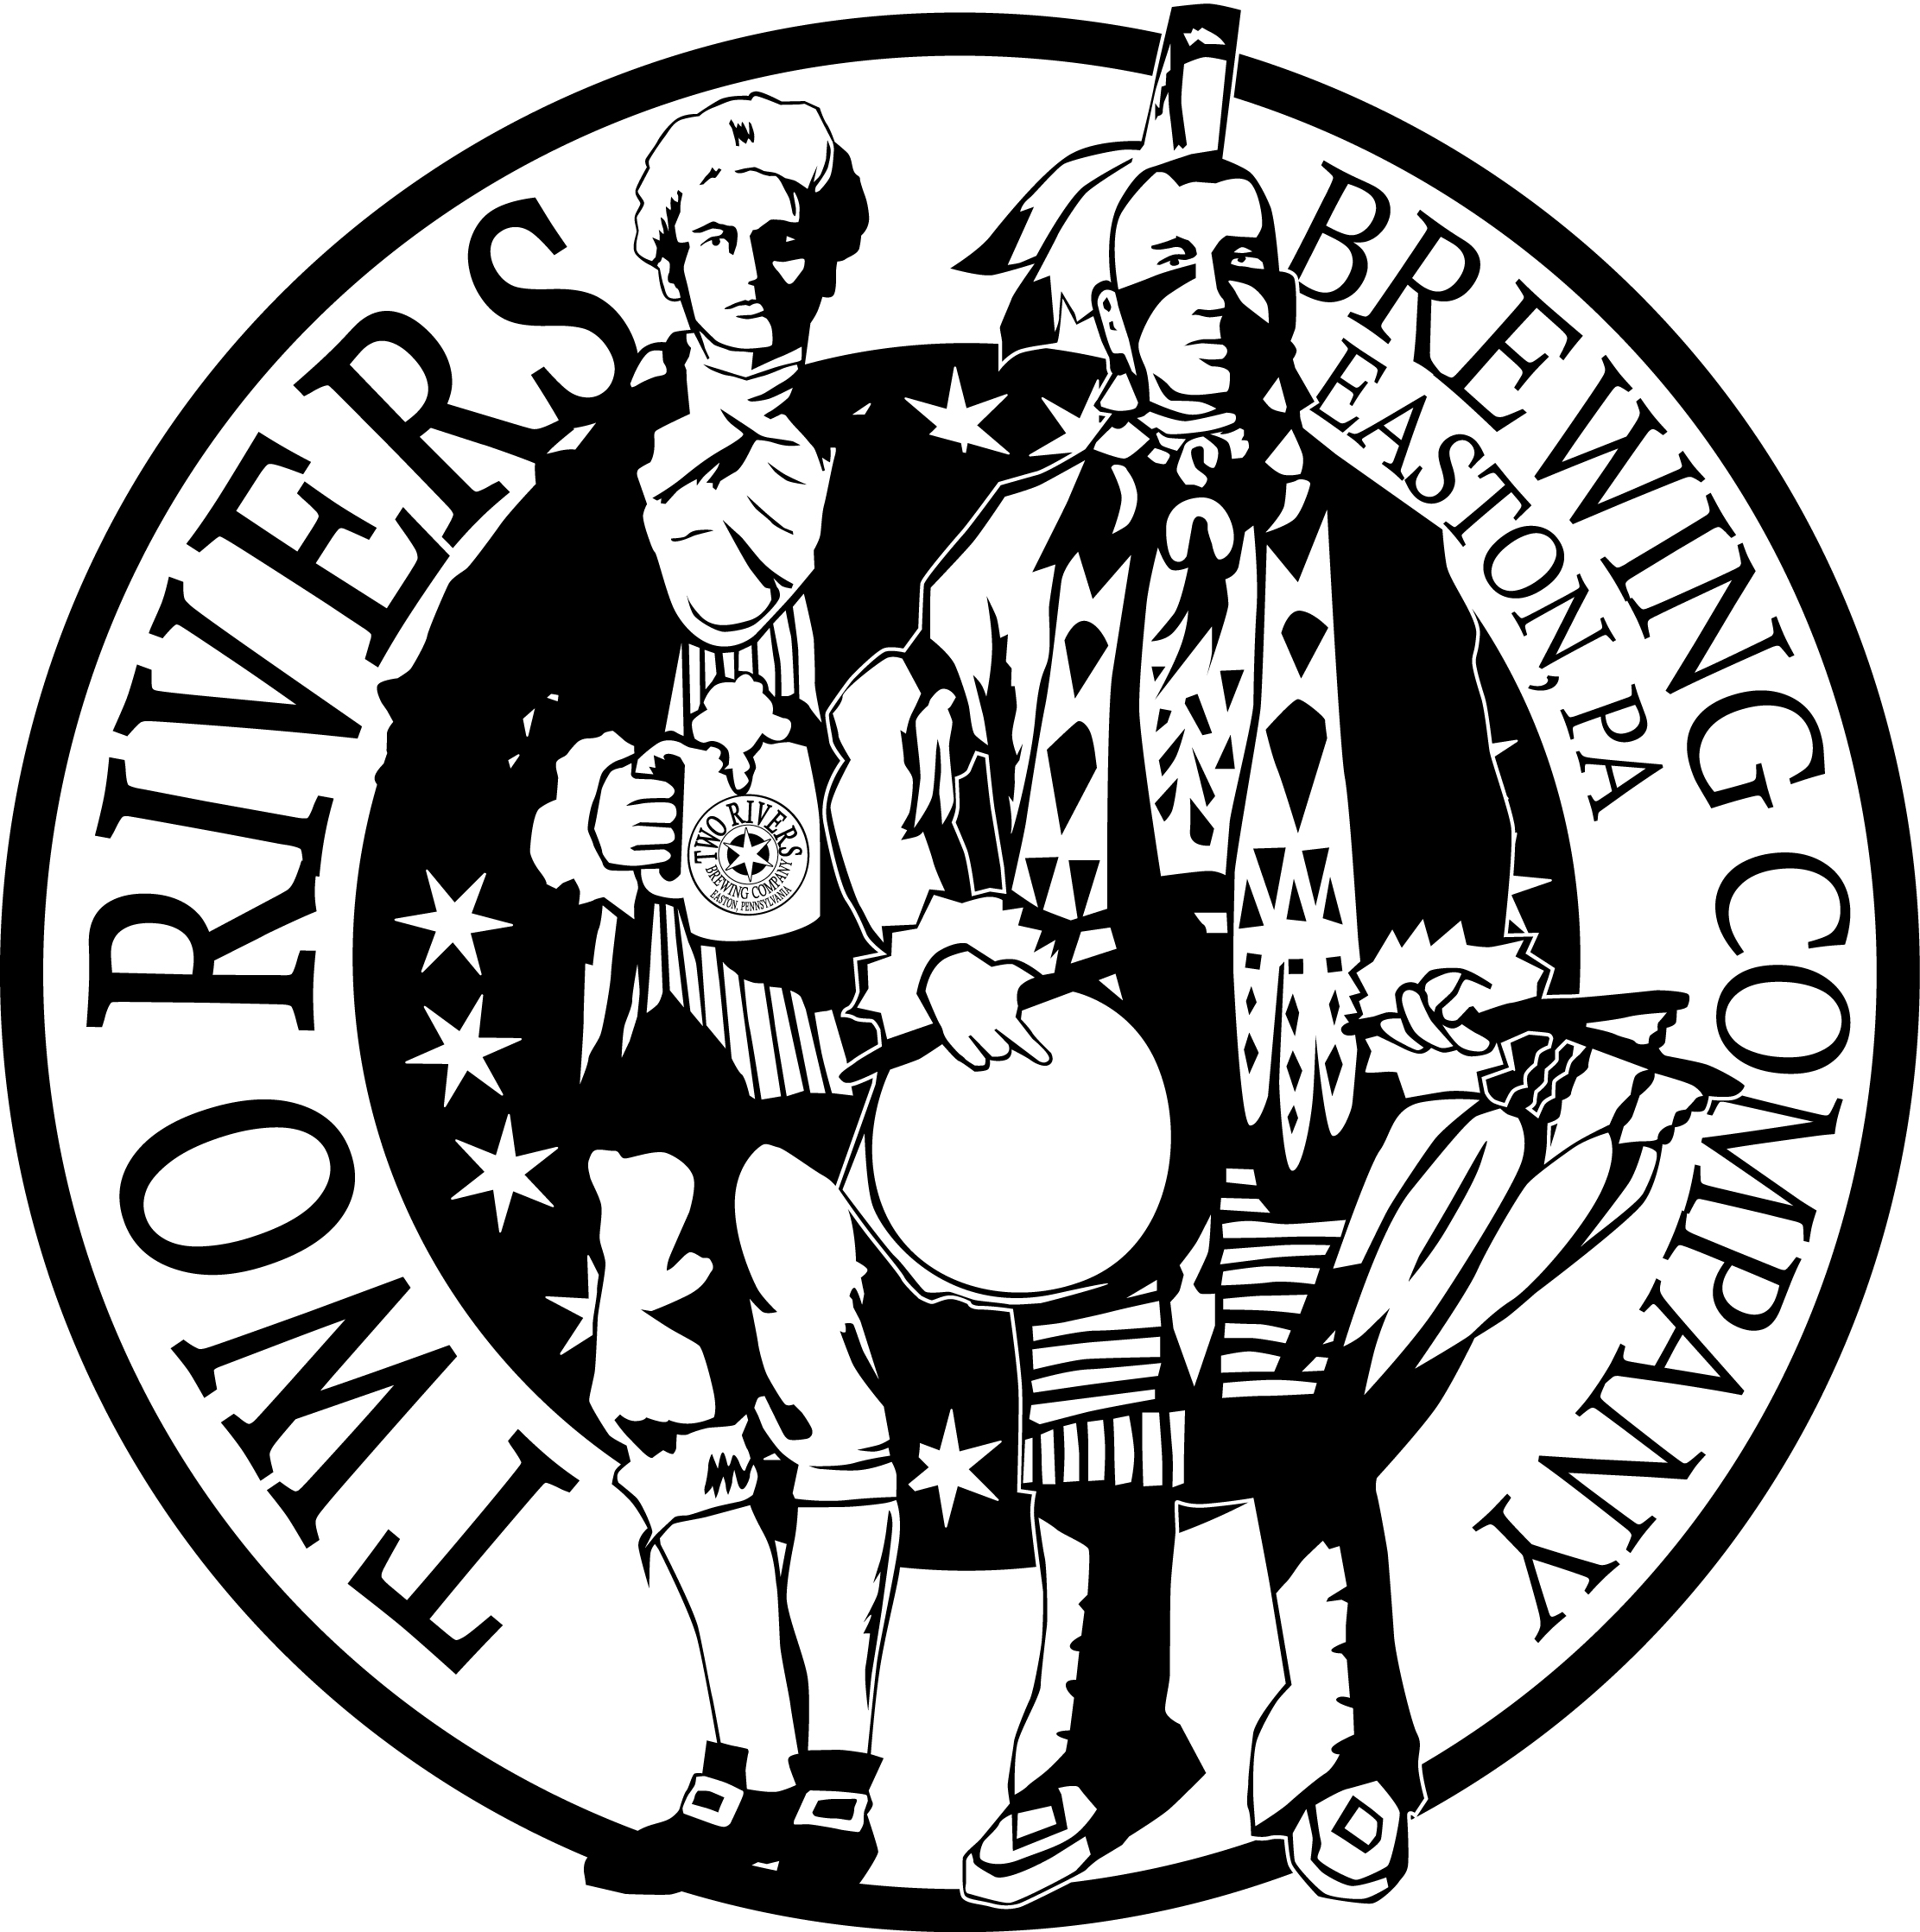 Two Rivers Brewing Company jobs